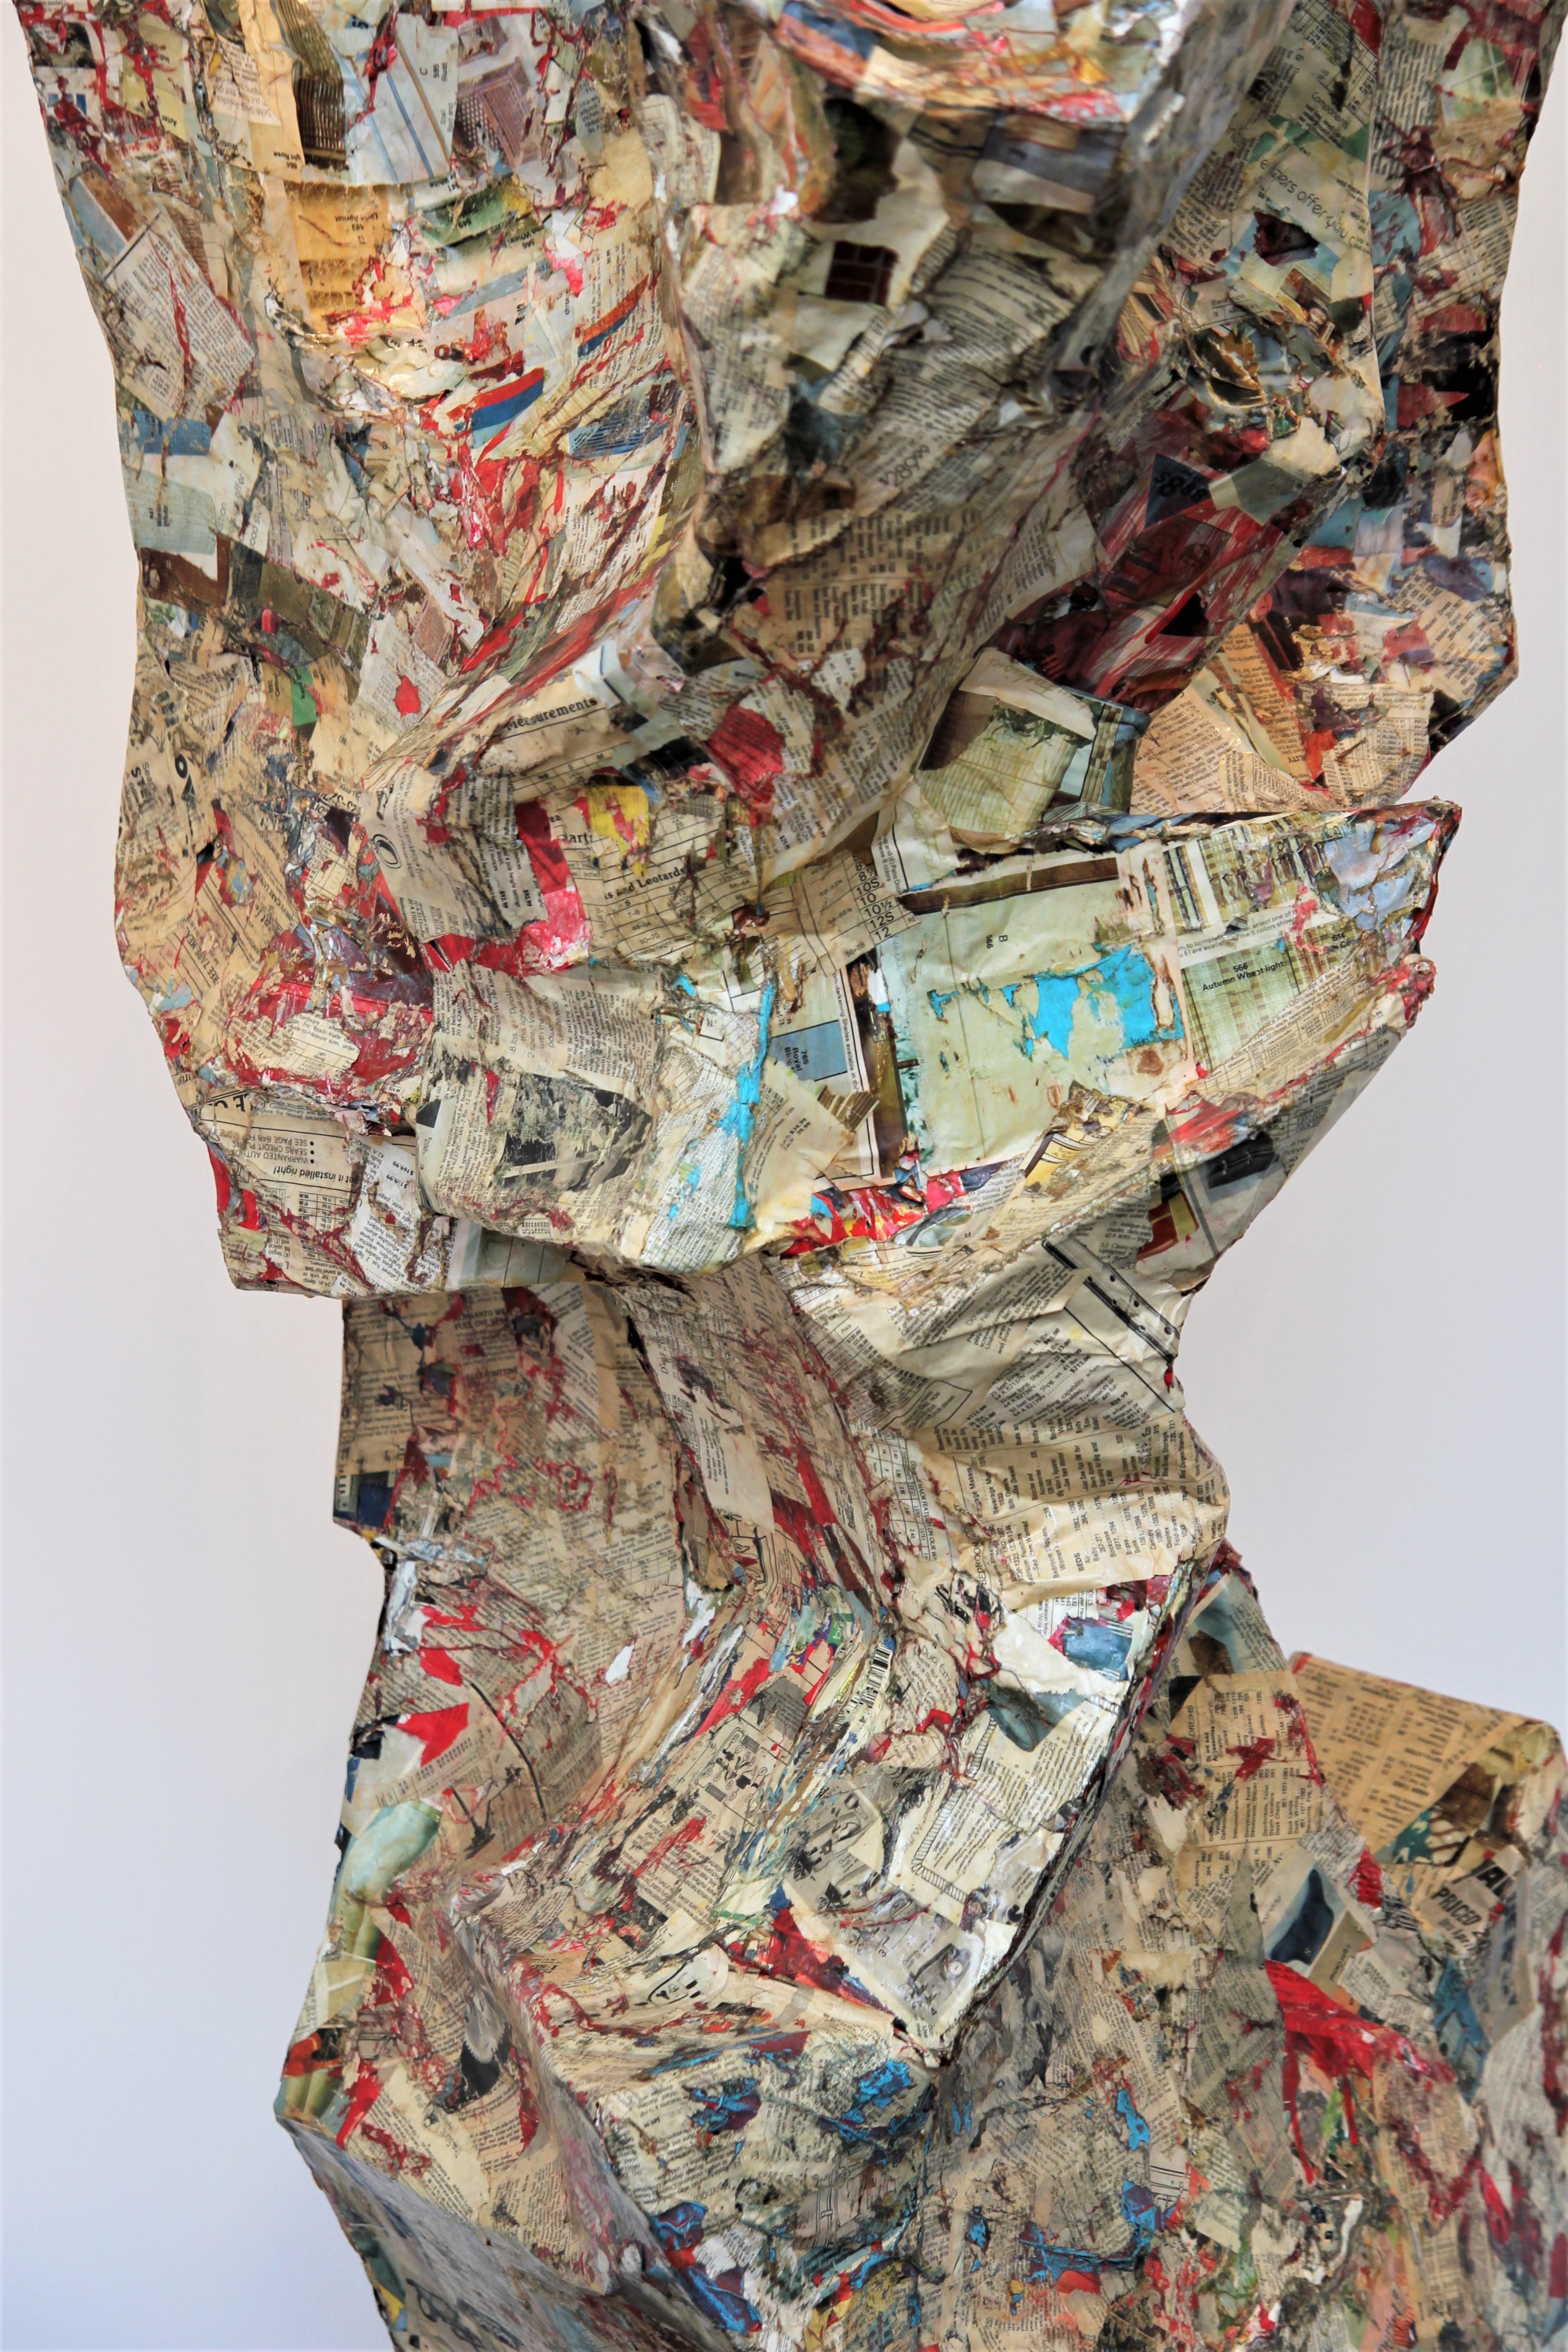 Colorful abstract contemporary collage sculpture that incorporates pages from 1960 Sears catalogues, cardboard, wood, concrete, acrylic paint, and wood glue. The organic, amorphous form features a primarily cream surface with accents of bright reds